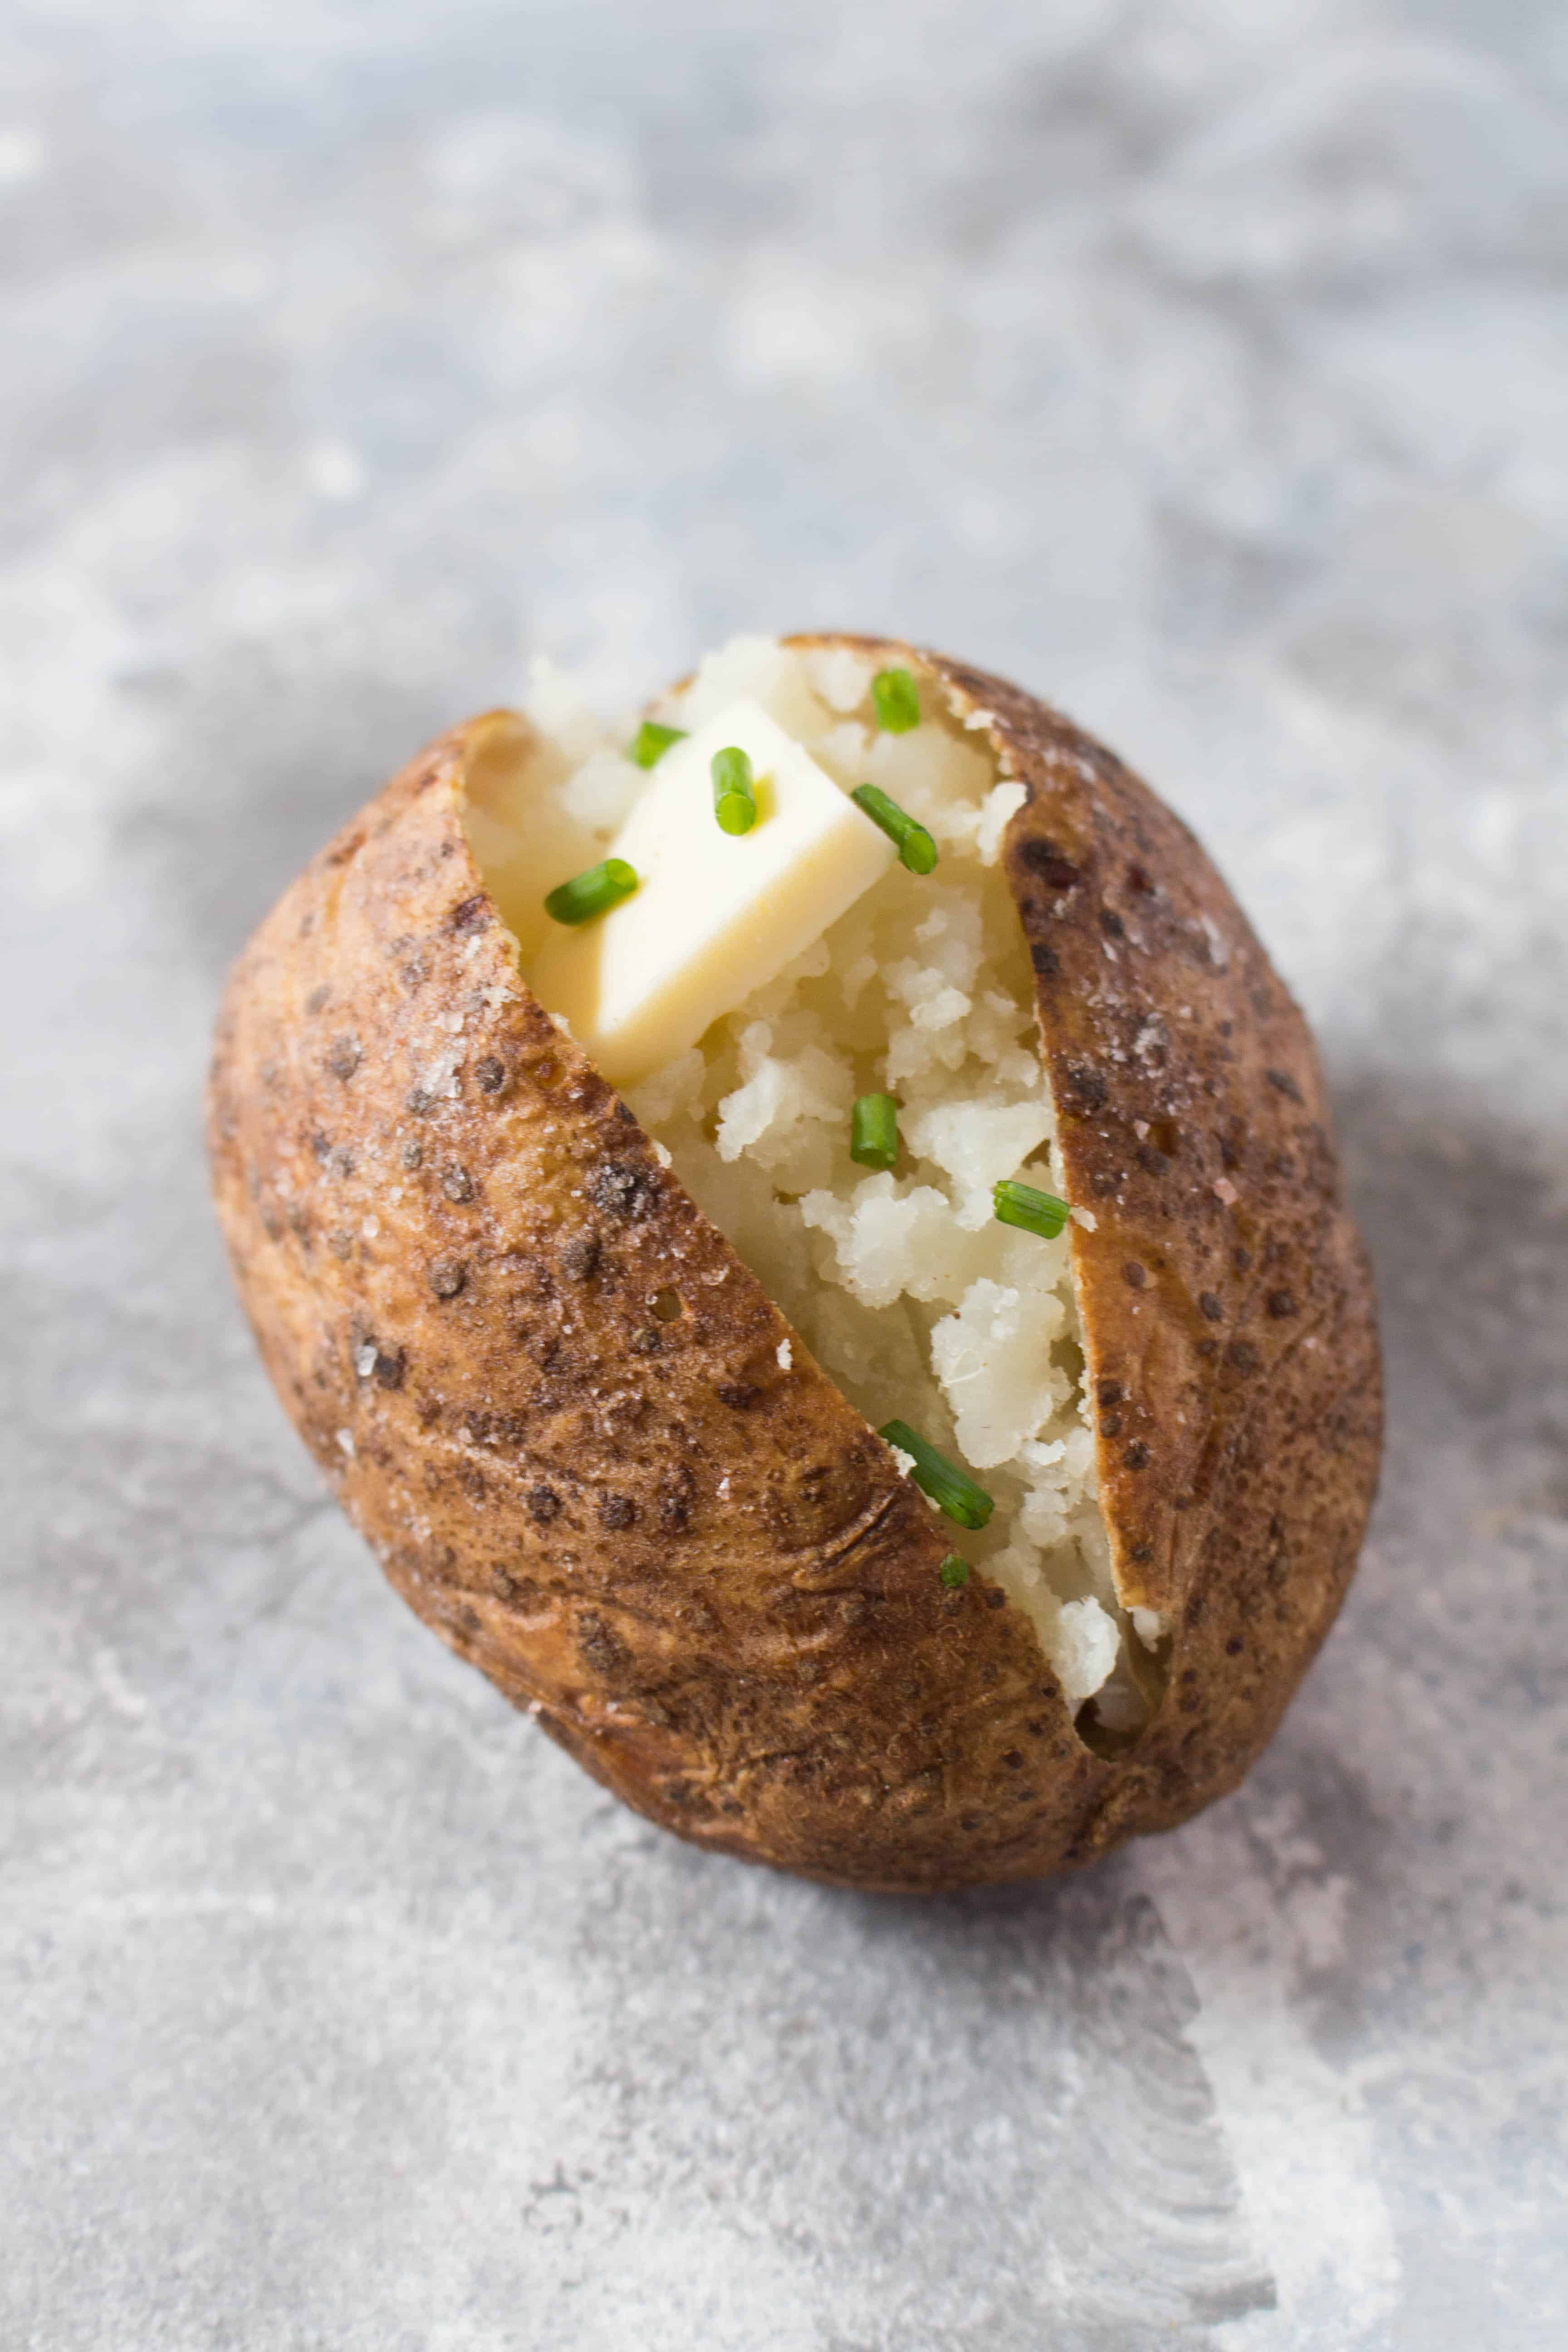 The perfect side dish for a holiday meal or any meal, this airfryer baked potato recipe will have you making flawless baked potatoes every time! 